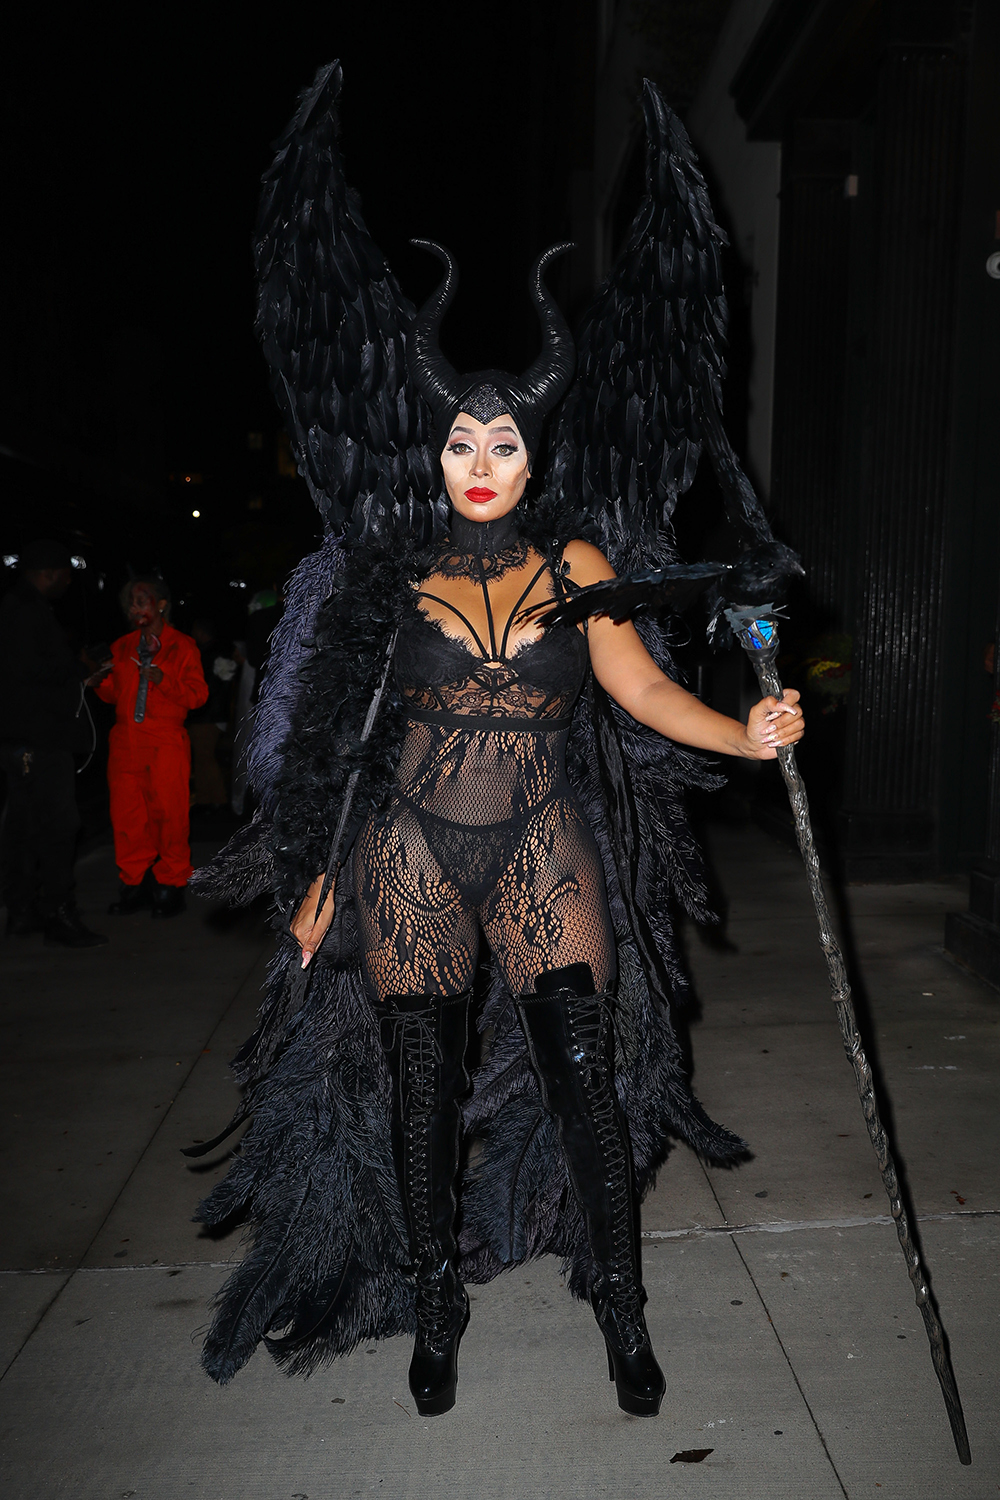 Celebrities In Lingerie For Halloween Costumes Photos image